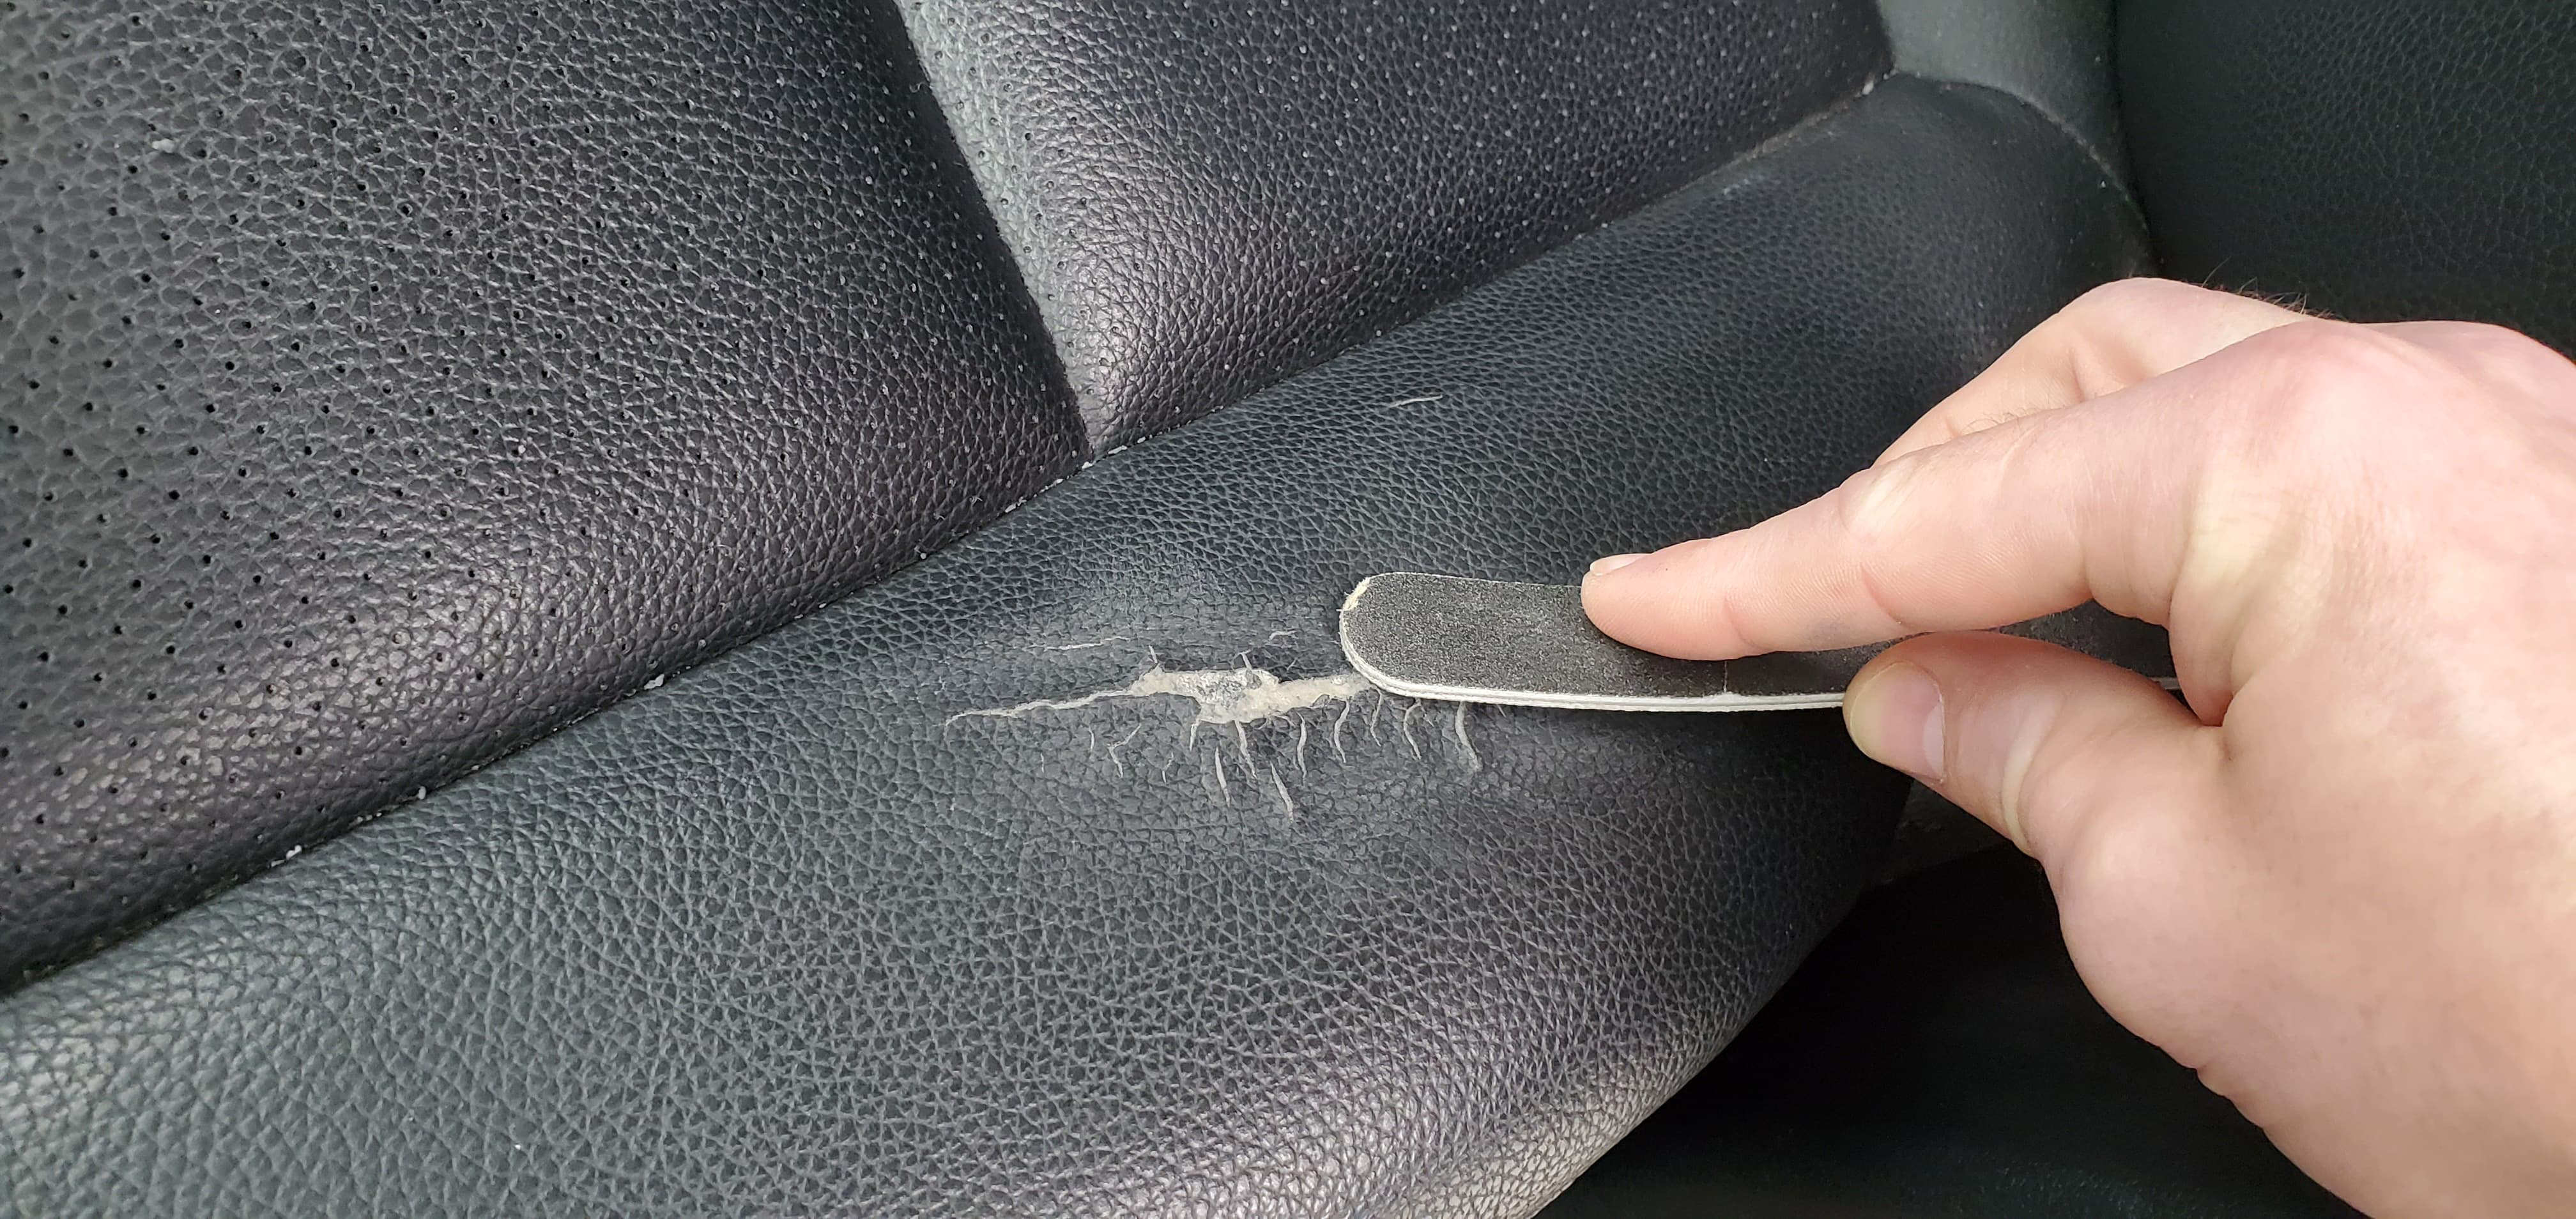 How To Repair A Leather Car Seat - How To Repair Large Tear In Vinyl Car Seat